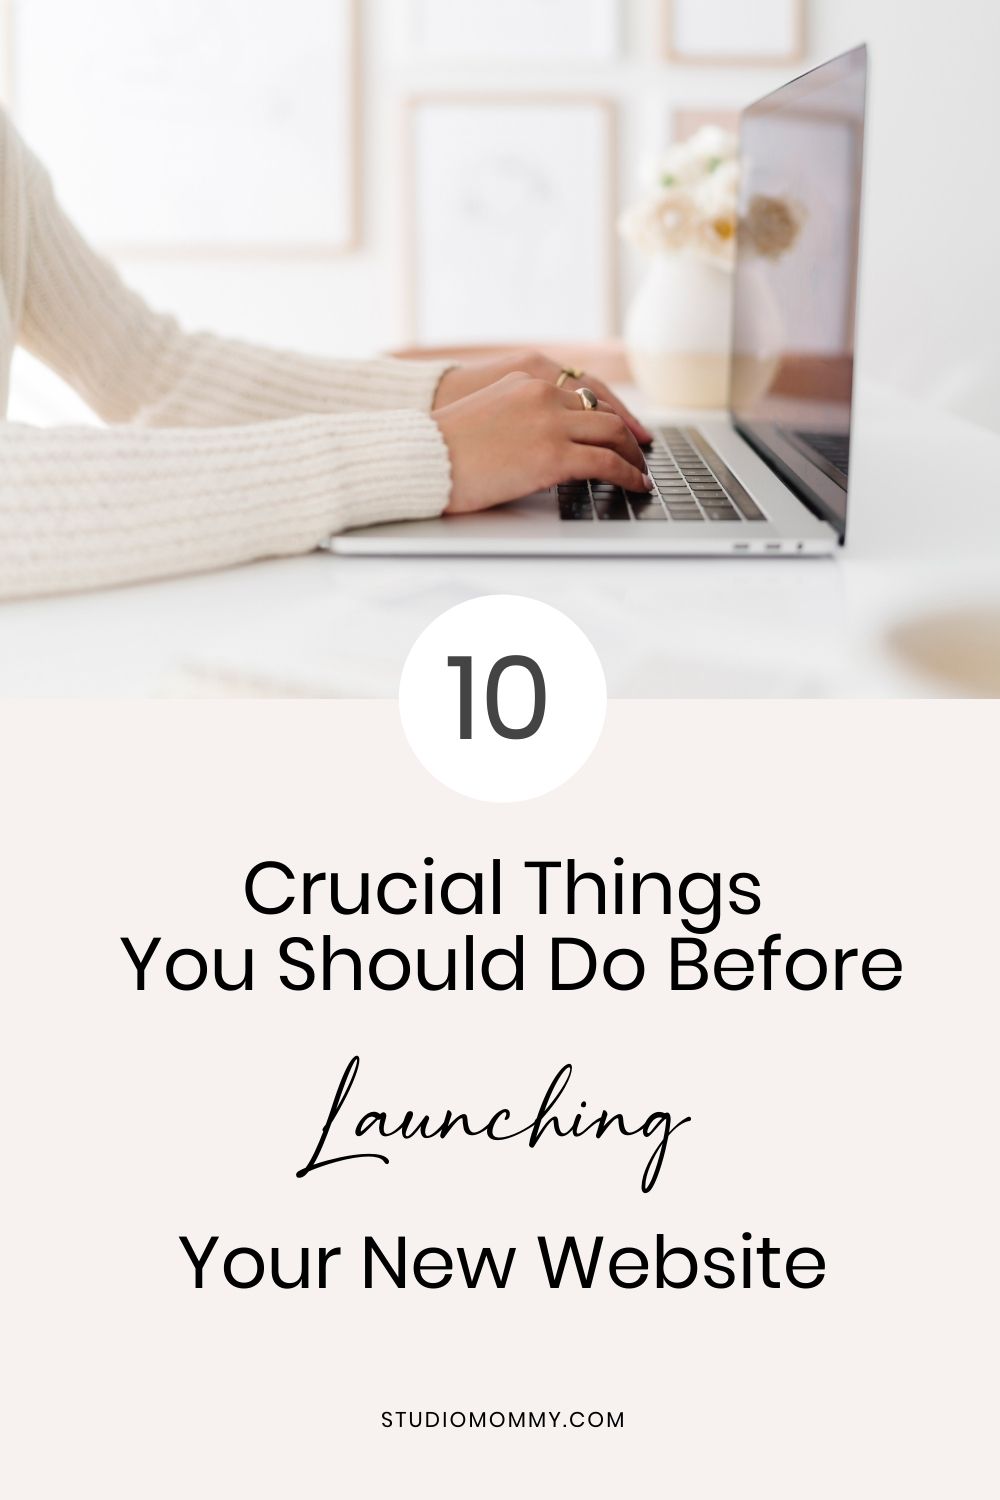 The big day is finally here!  Time to share your beautiful new website with the world!  But have you thoroughly reviewed and proofread your website to make sure everything is running smoothly?  If not, here are ten things you should do before launching your new website. #studiomommy